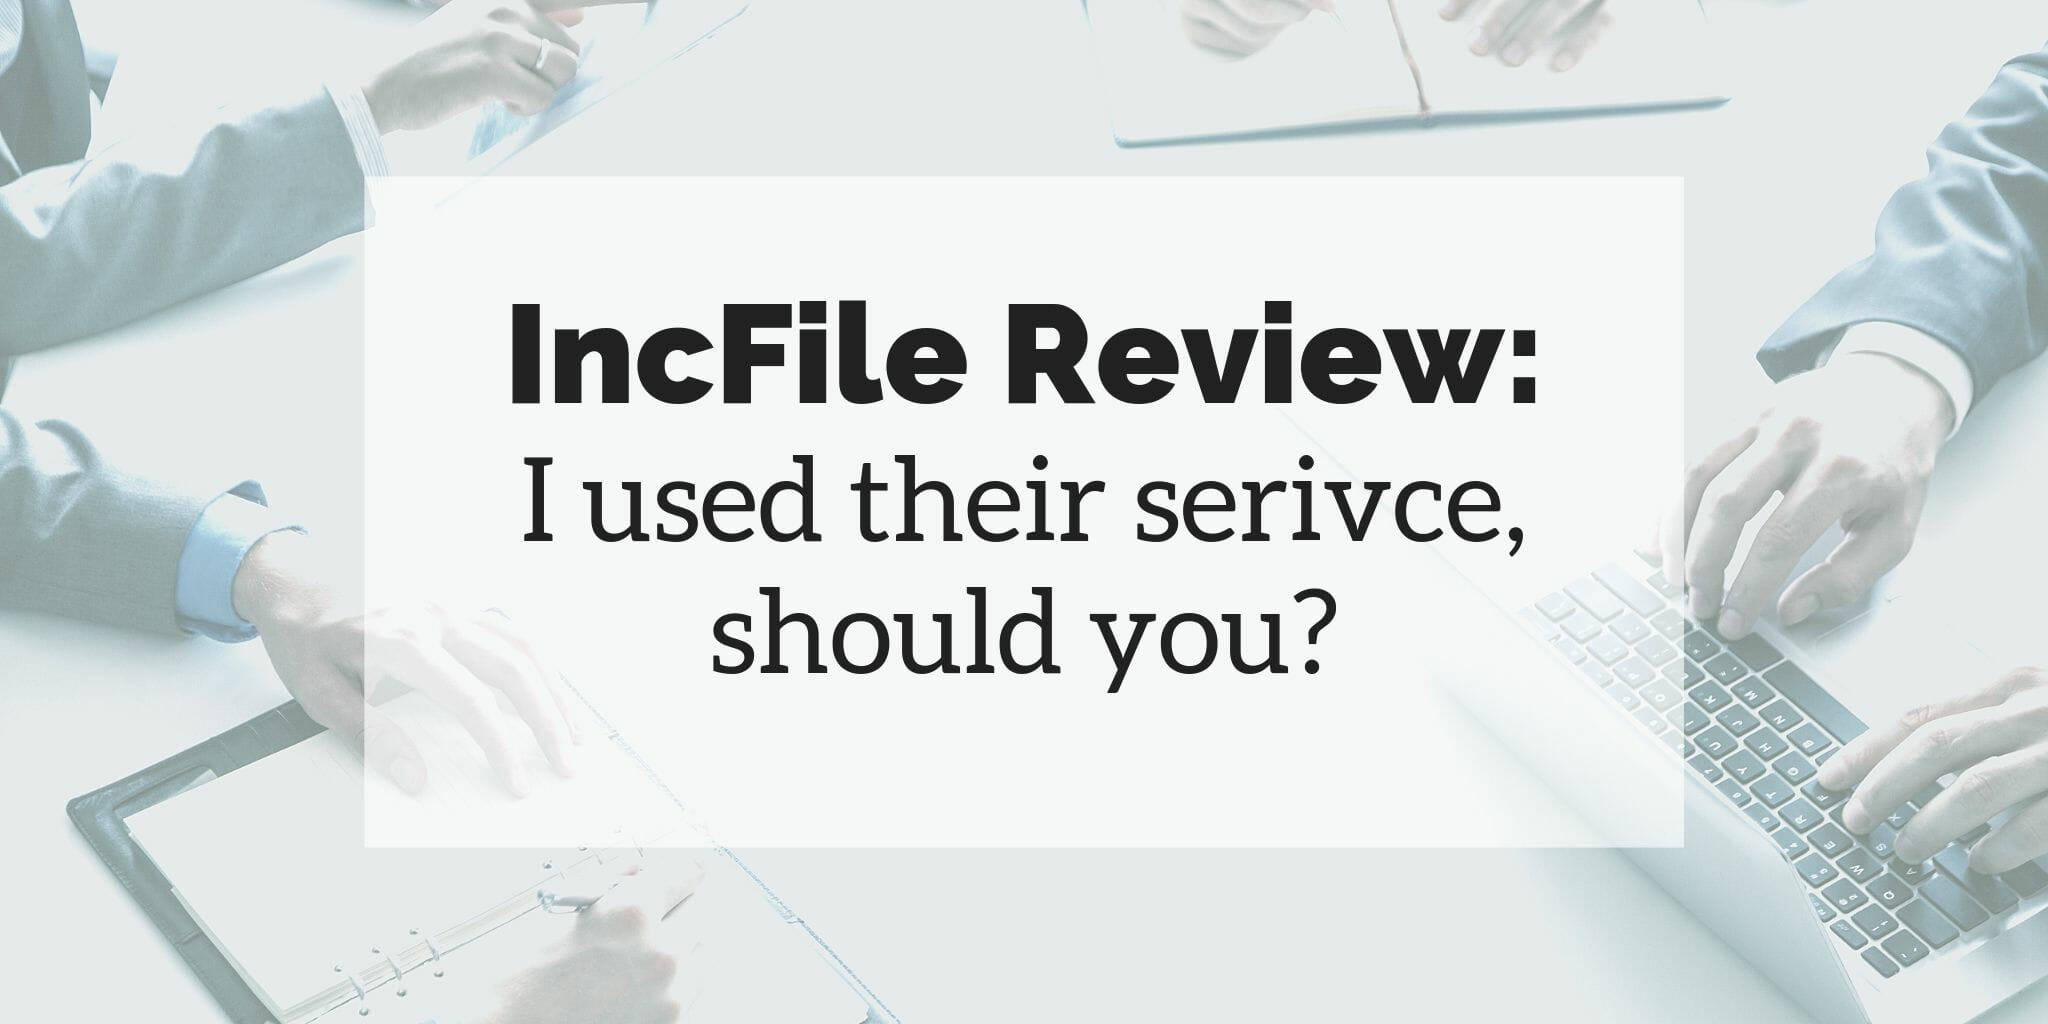 Incfile And Harvard Business Service Inc Which One Is Better For Set Up A Business In Dalaware